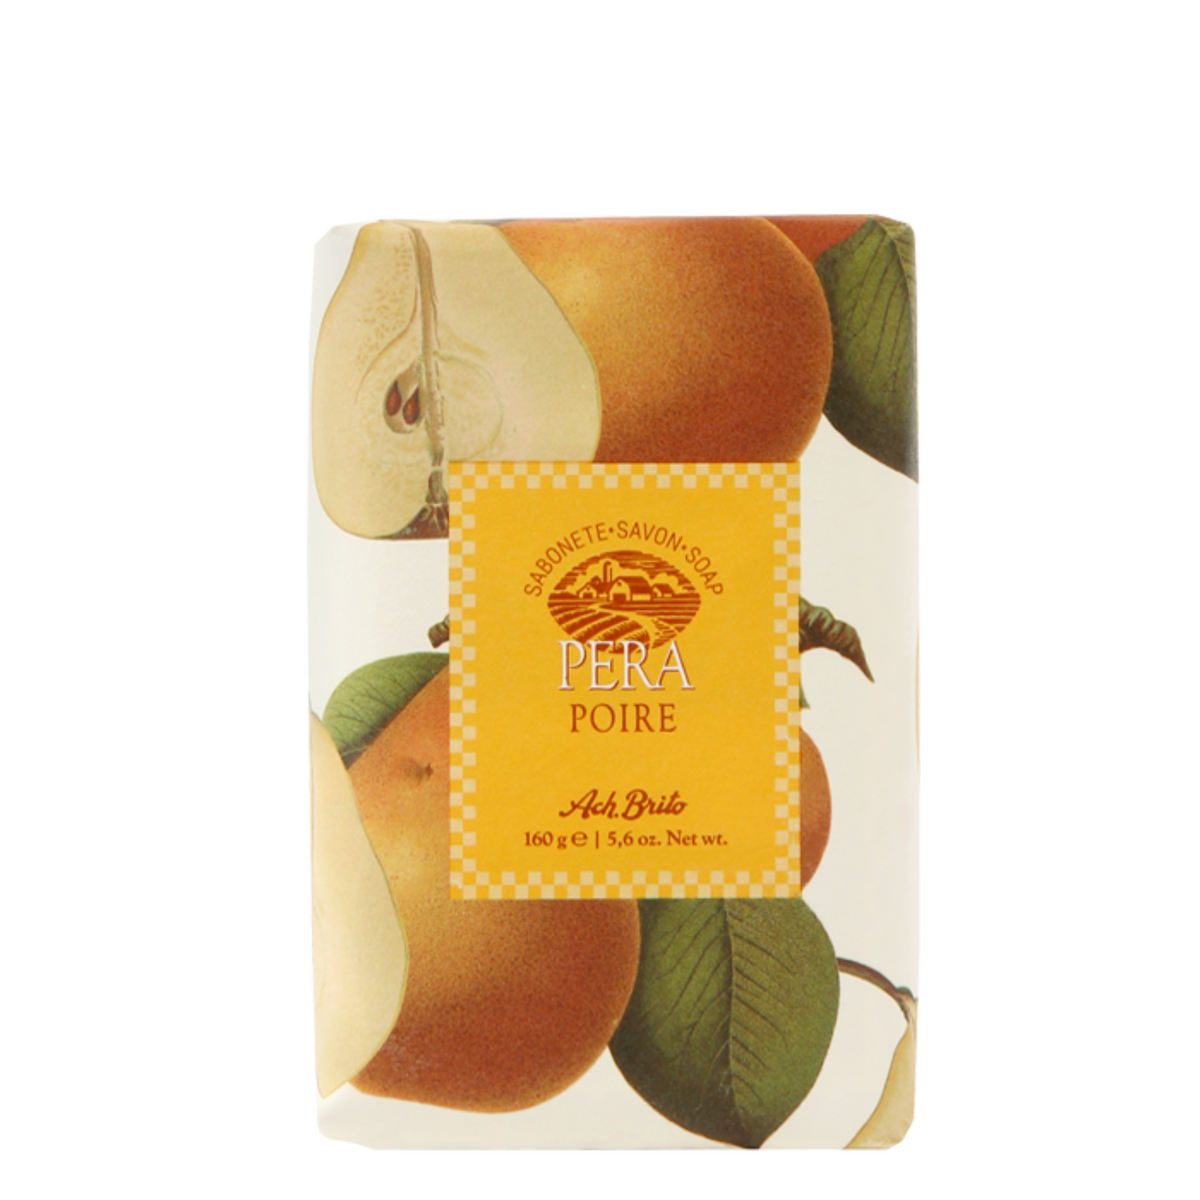 Primary Image of Pear (Pera) Bar Soap